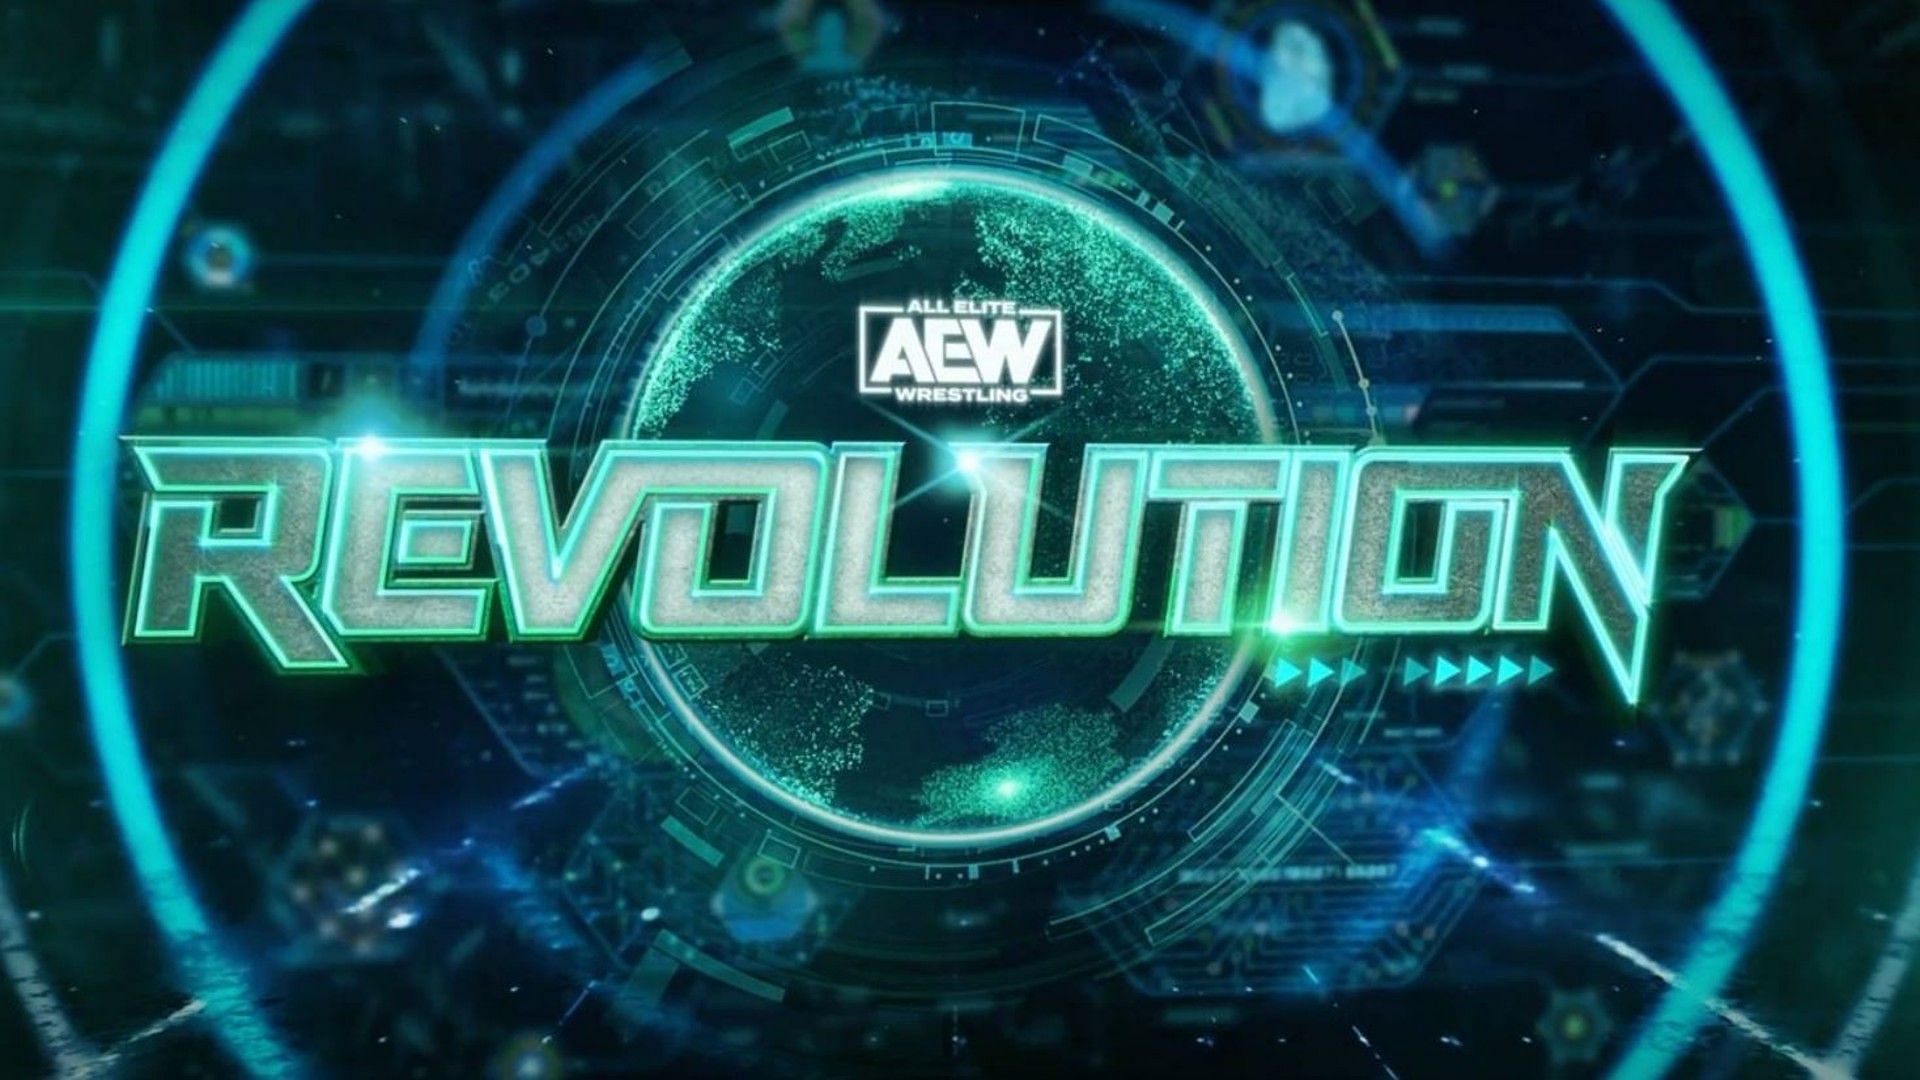 AEW Revolution takes place on Sunday March 5th from San Francisco, CA